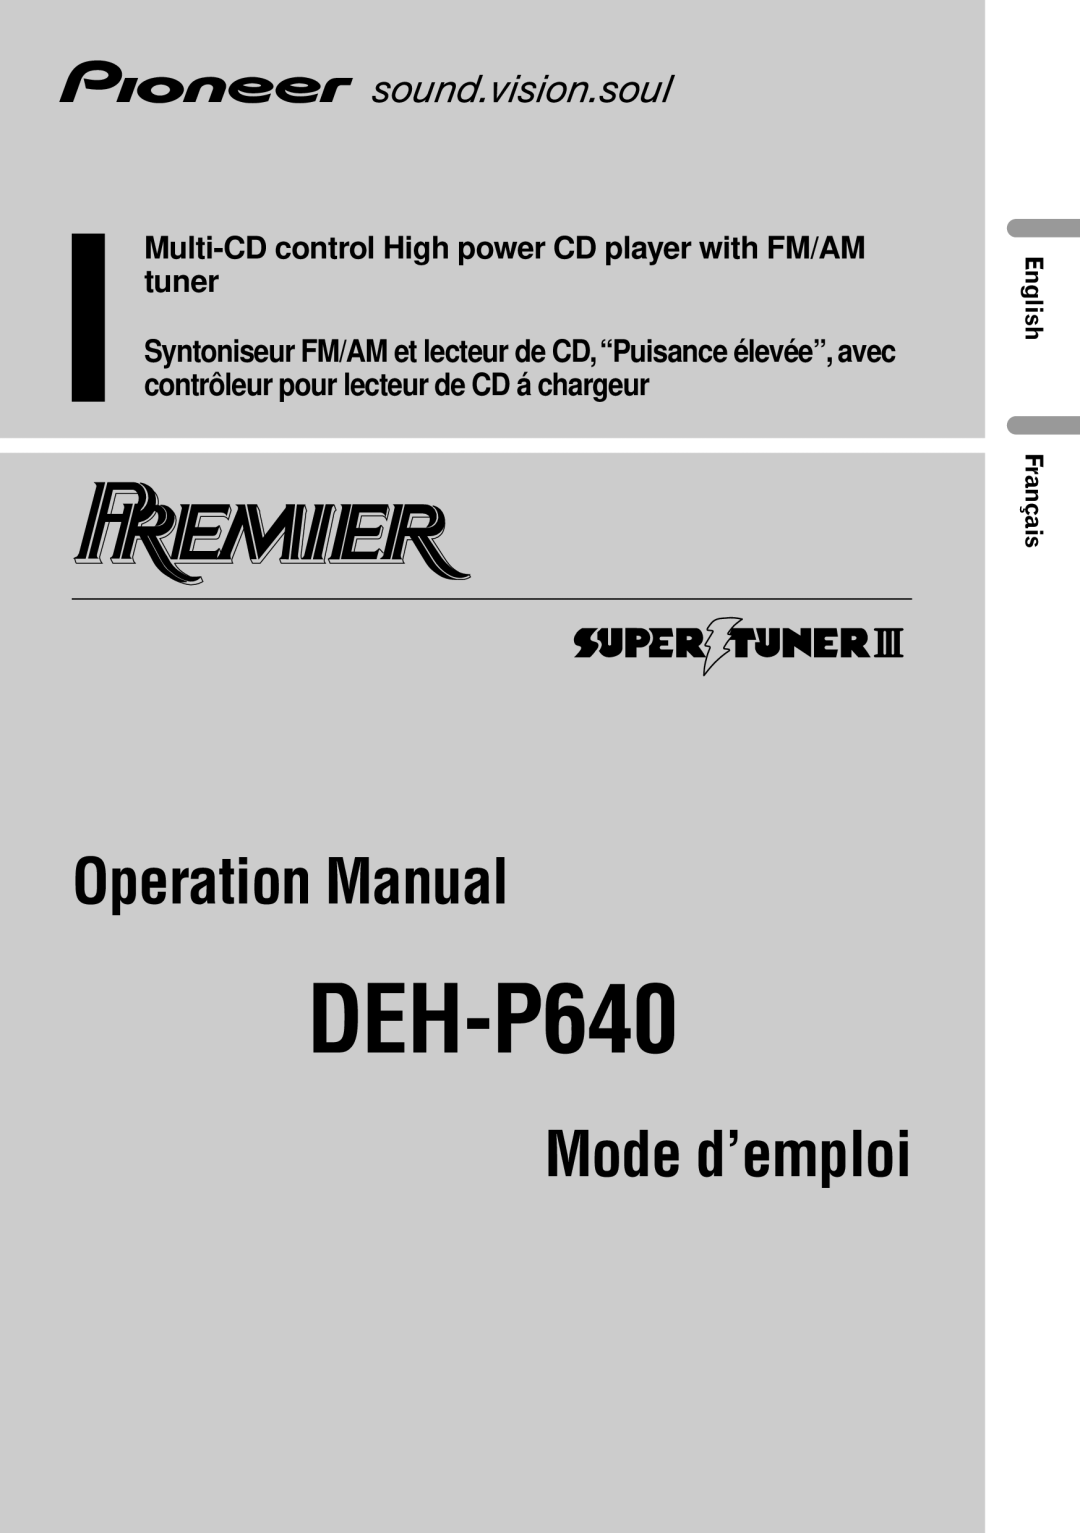 Pioneer DEH-P640 operation manual Multi-CD control High power CD player with FM/AM tuner, English Français 